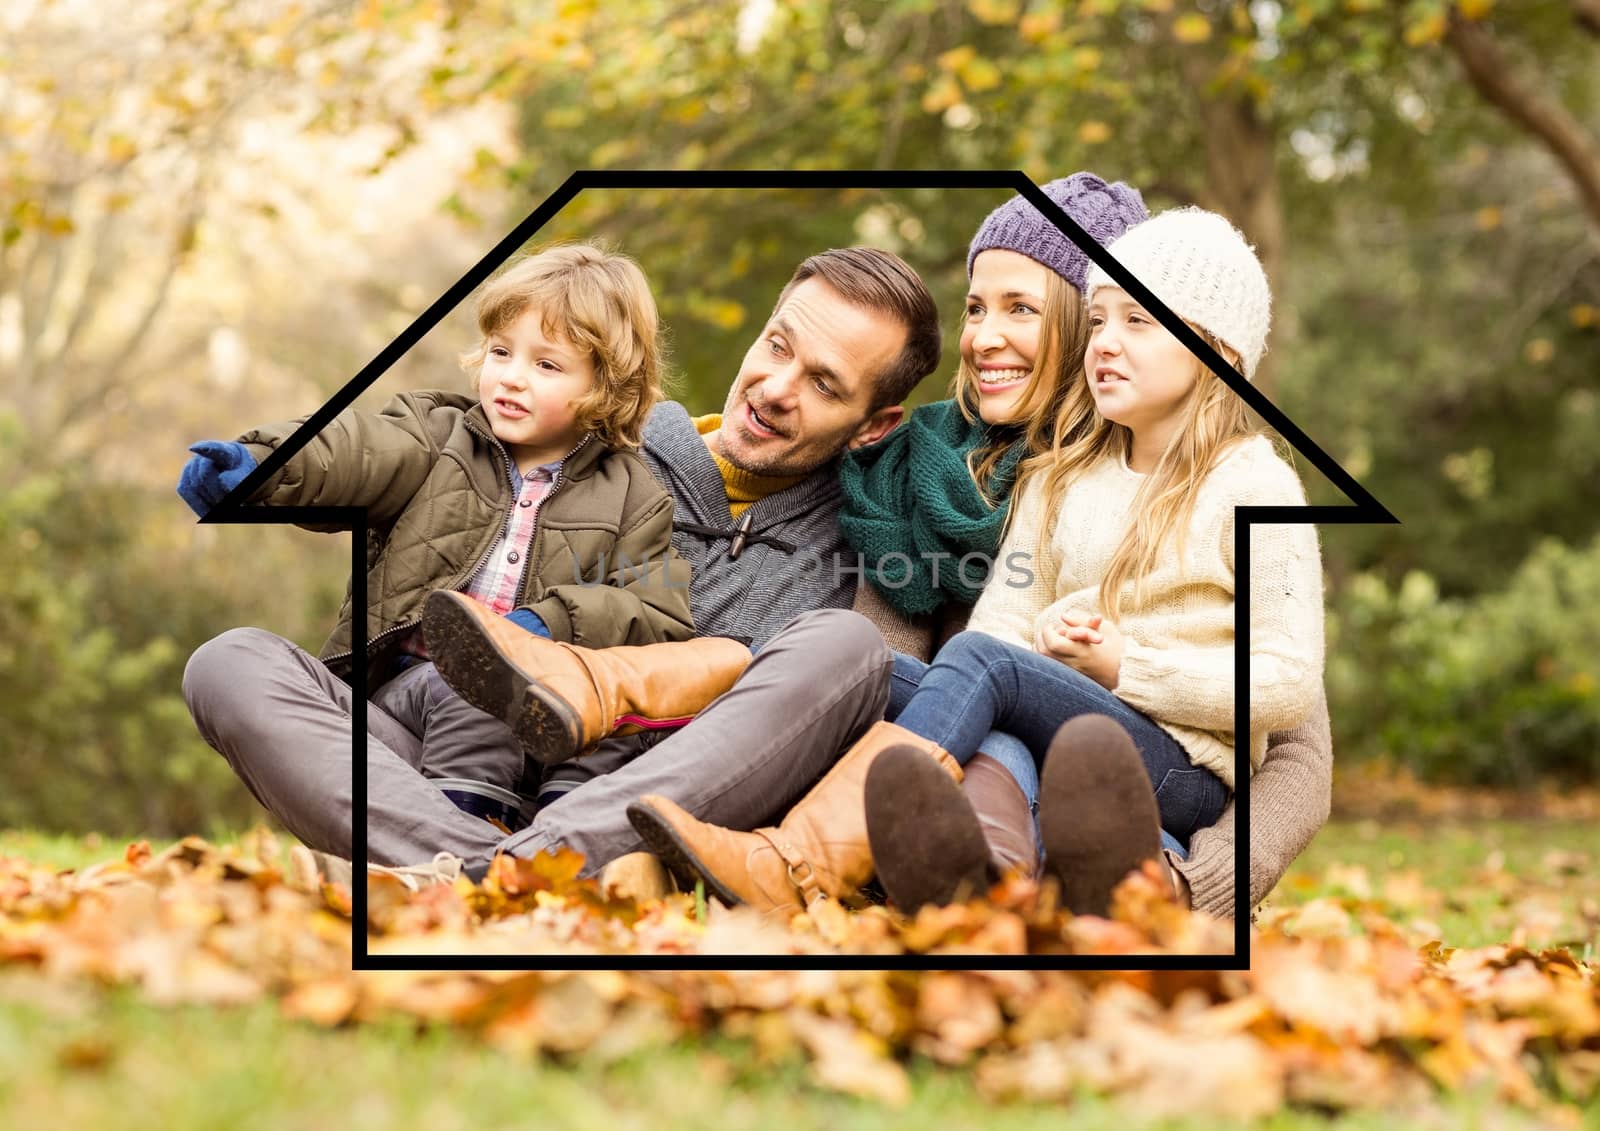 Digital composition of family sitting outdoors against house outline in background